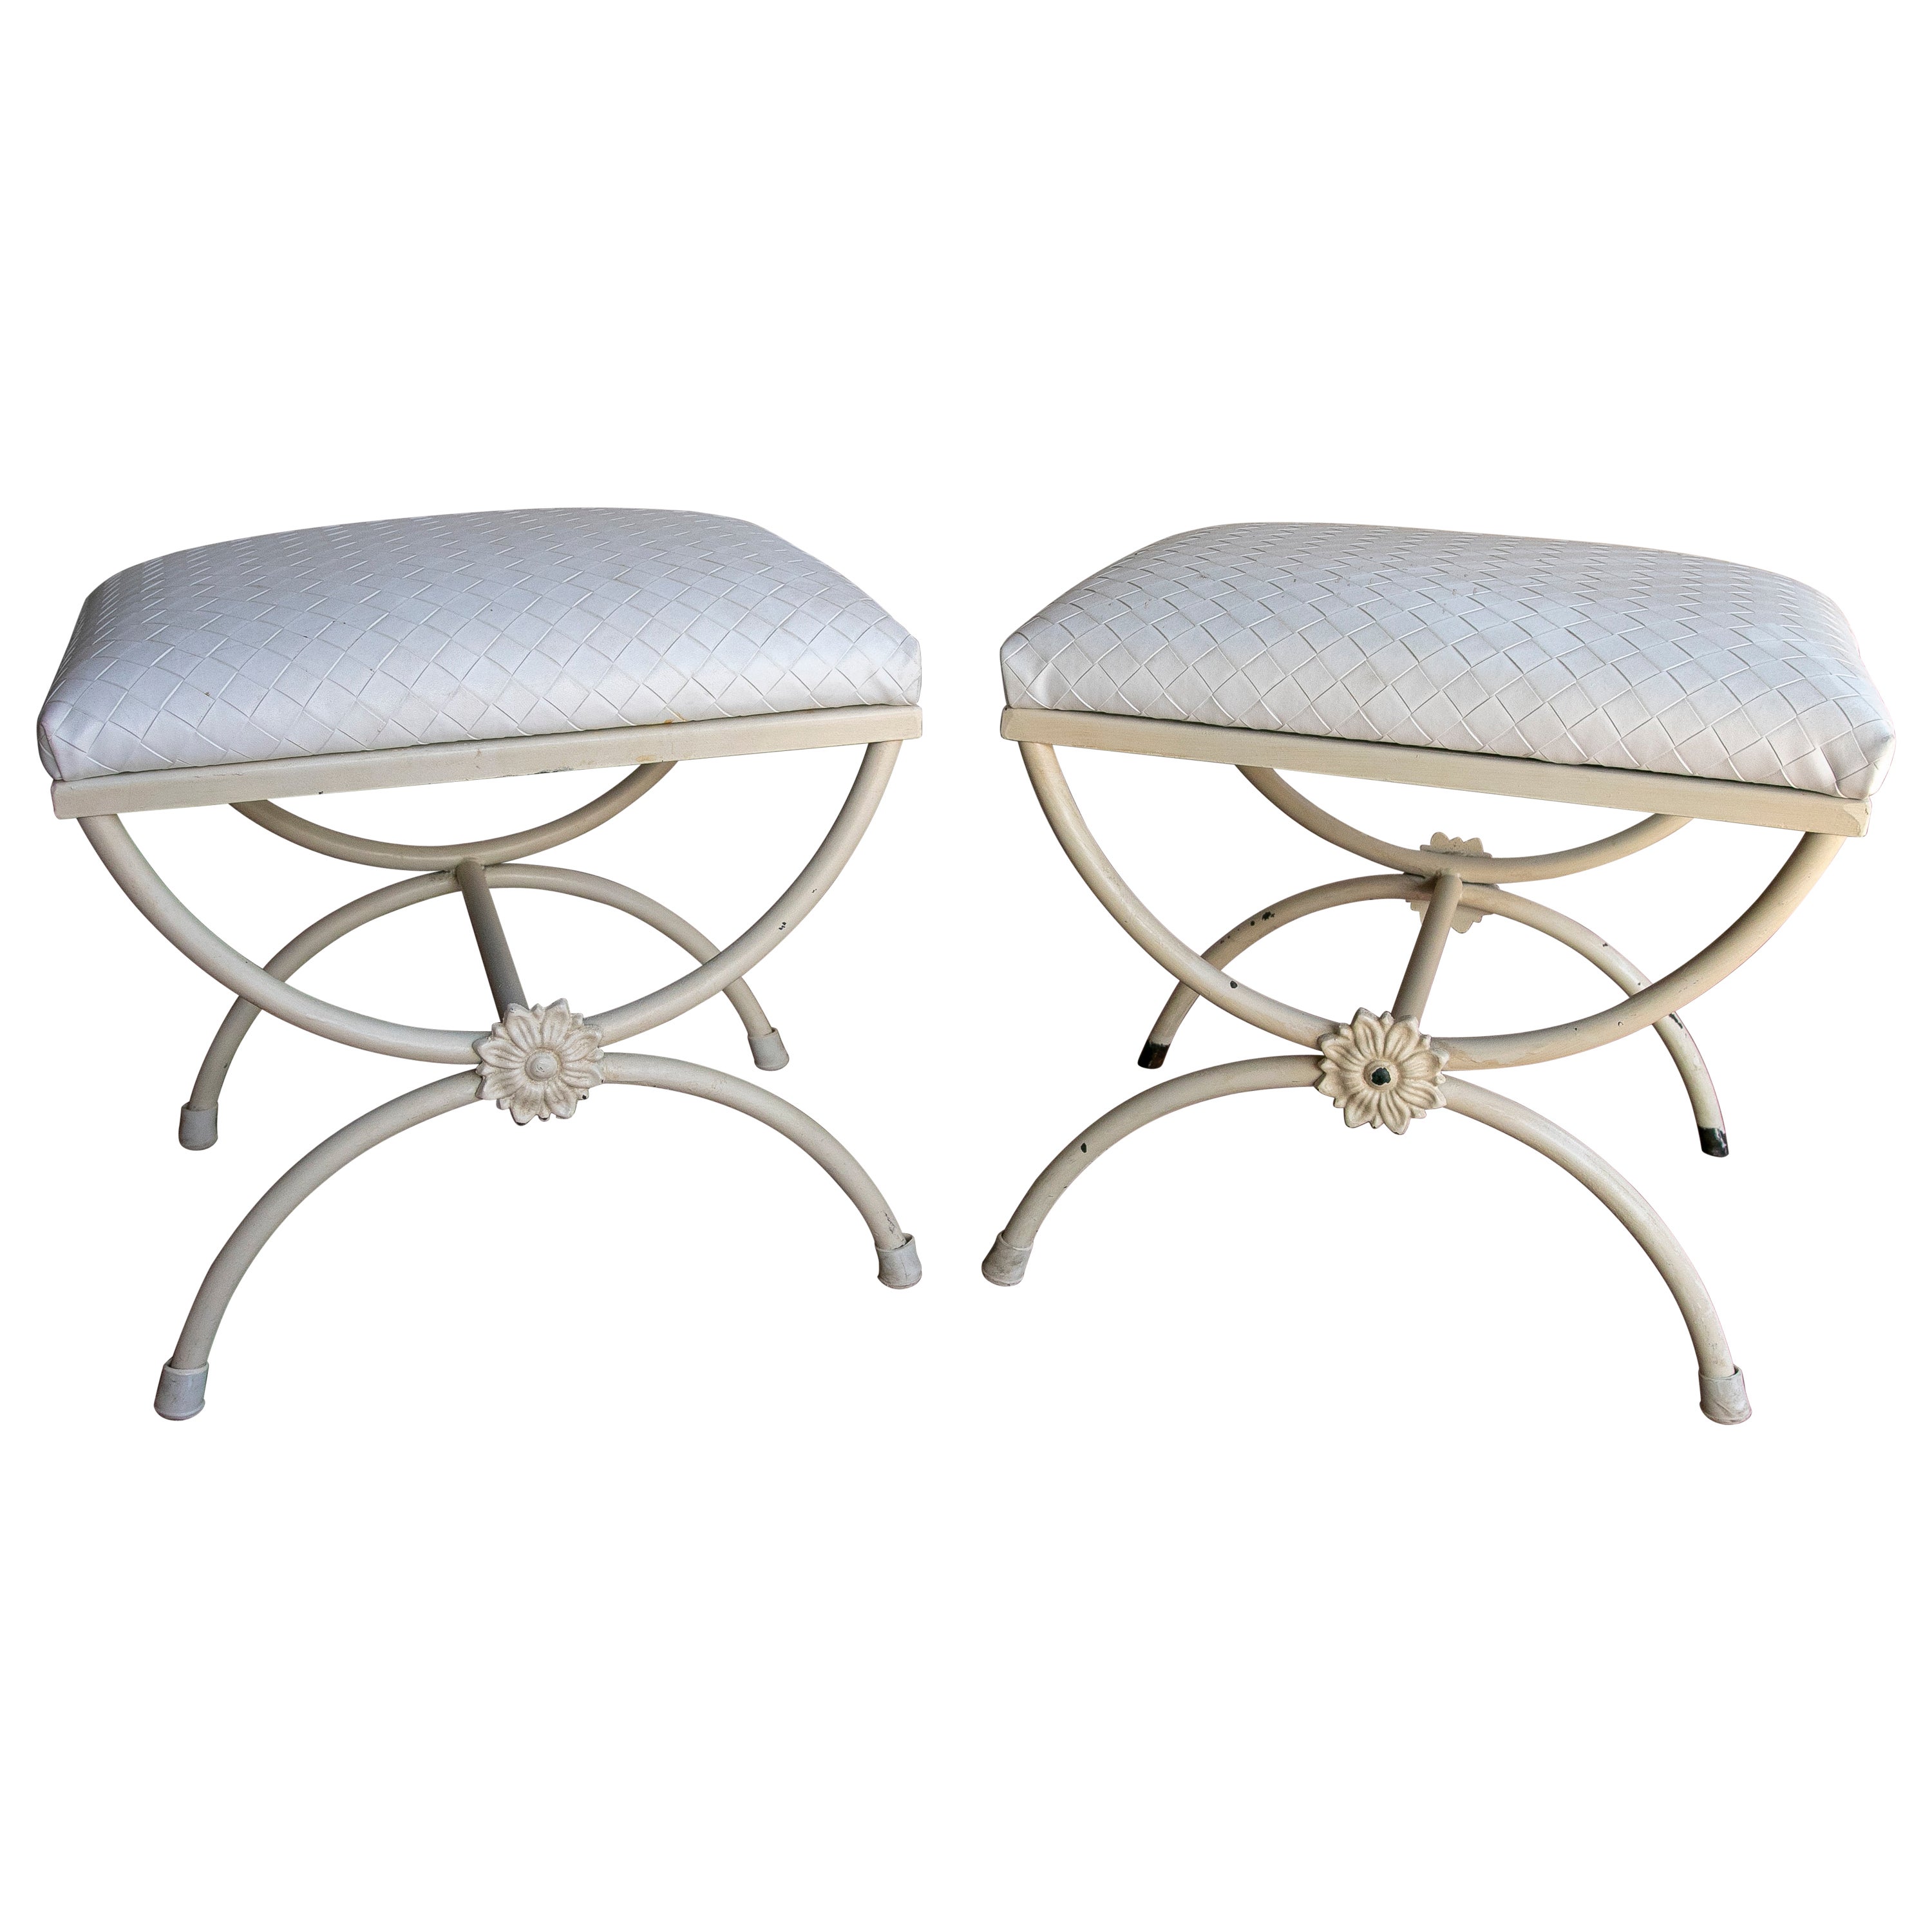 1980s Pair of White Painted Iron Armchairs